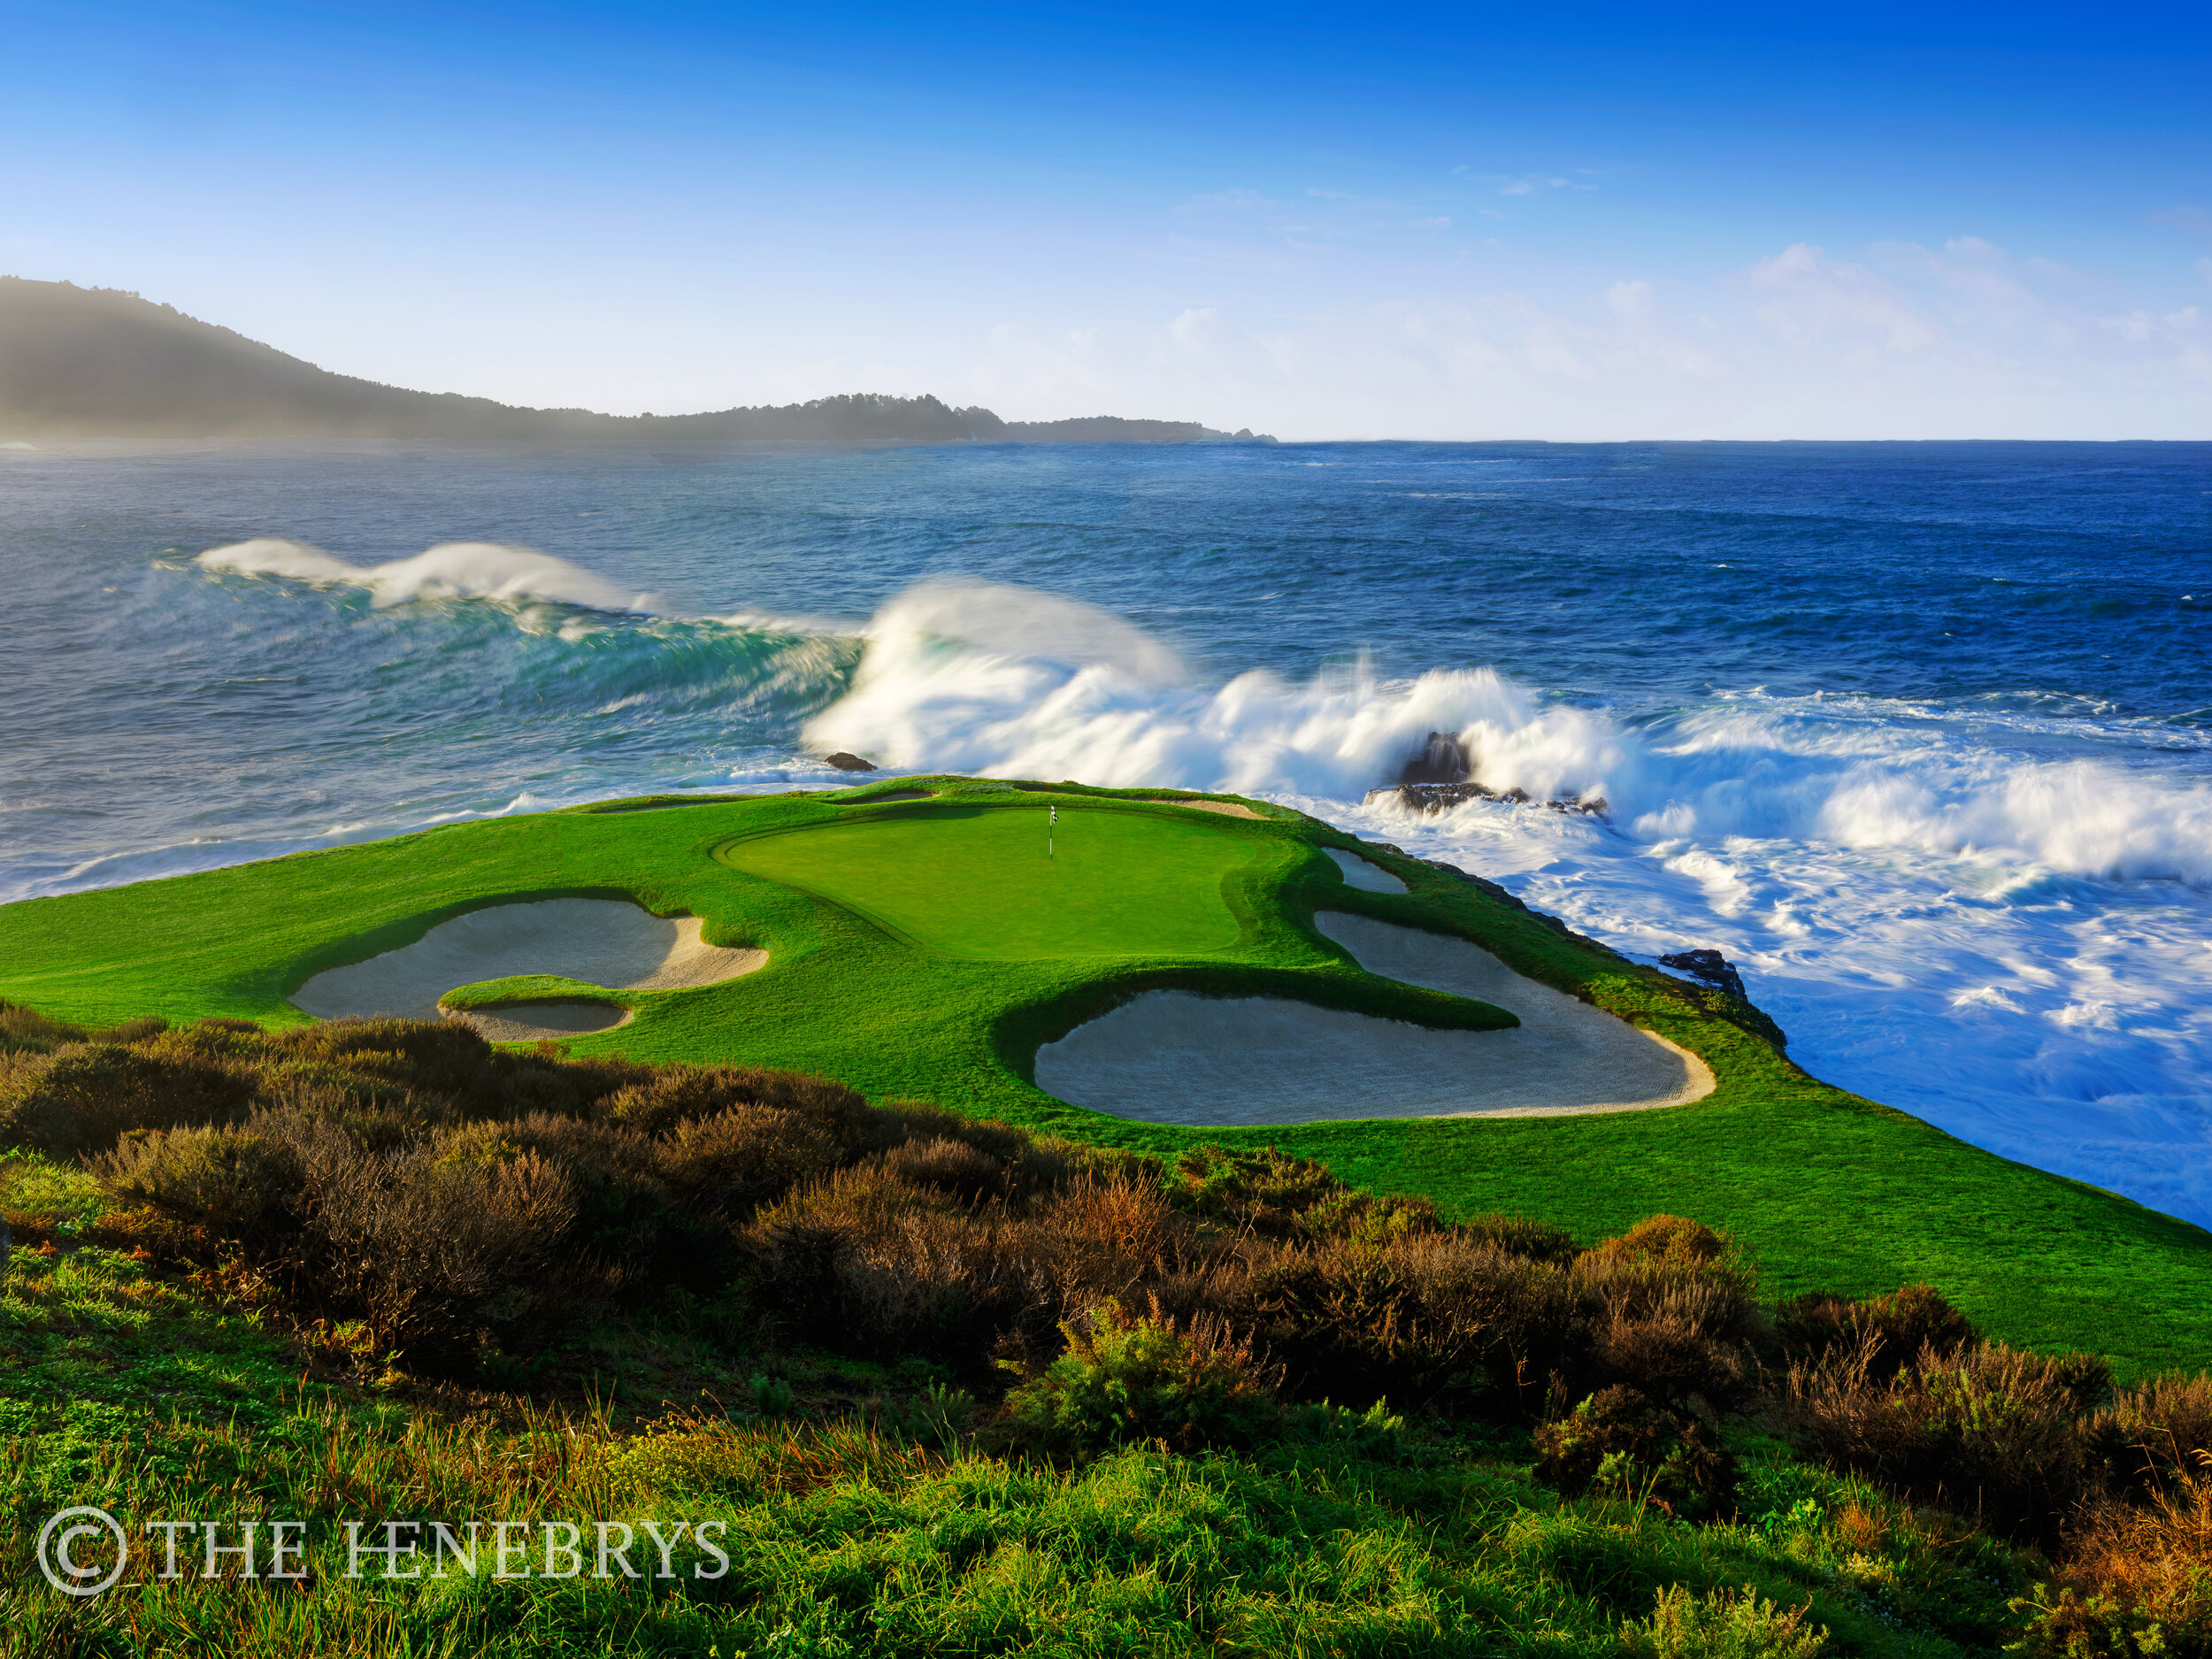 Pebble Beach Golf Course Photos by the Henebrys